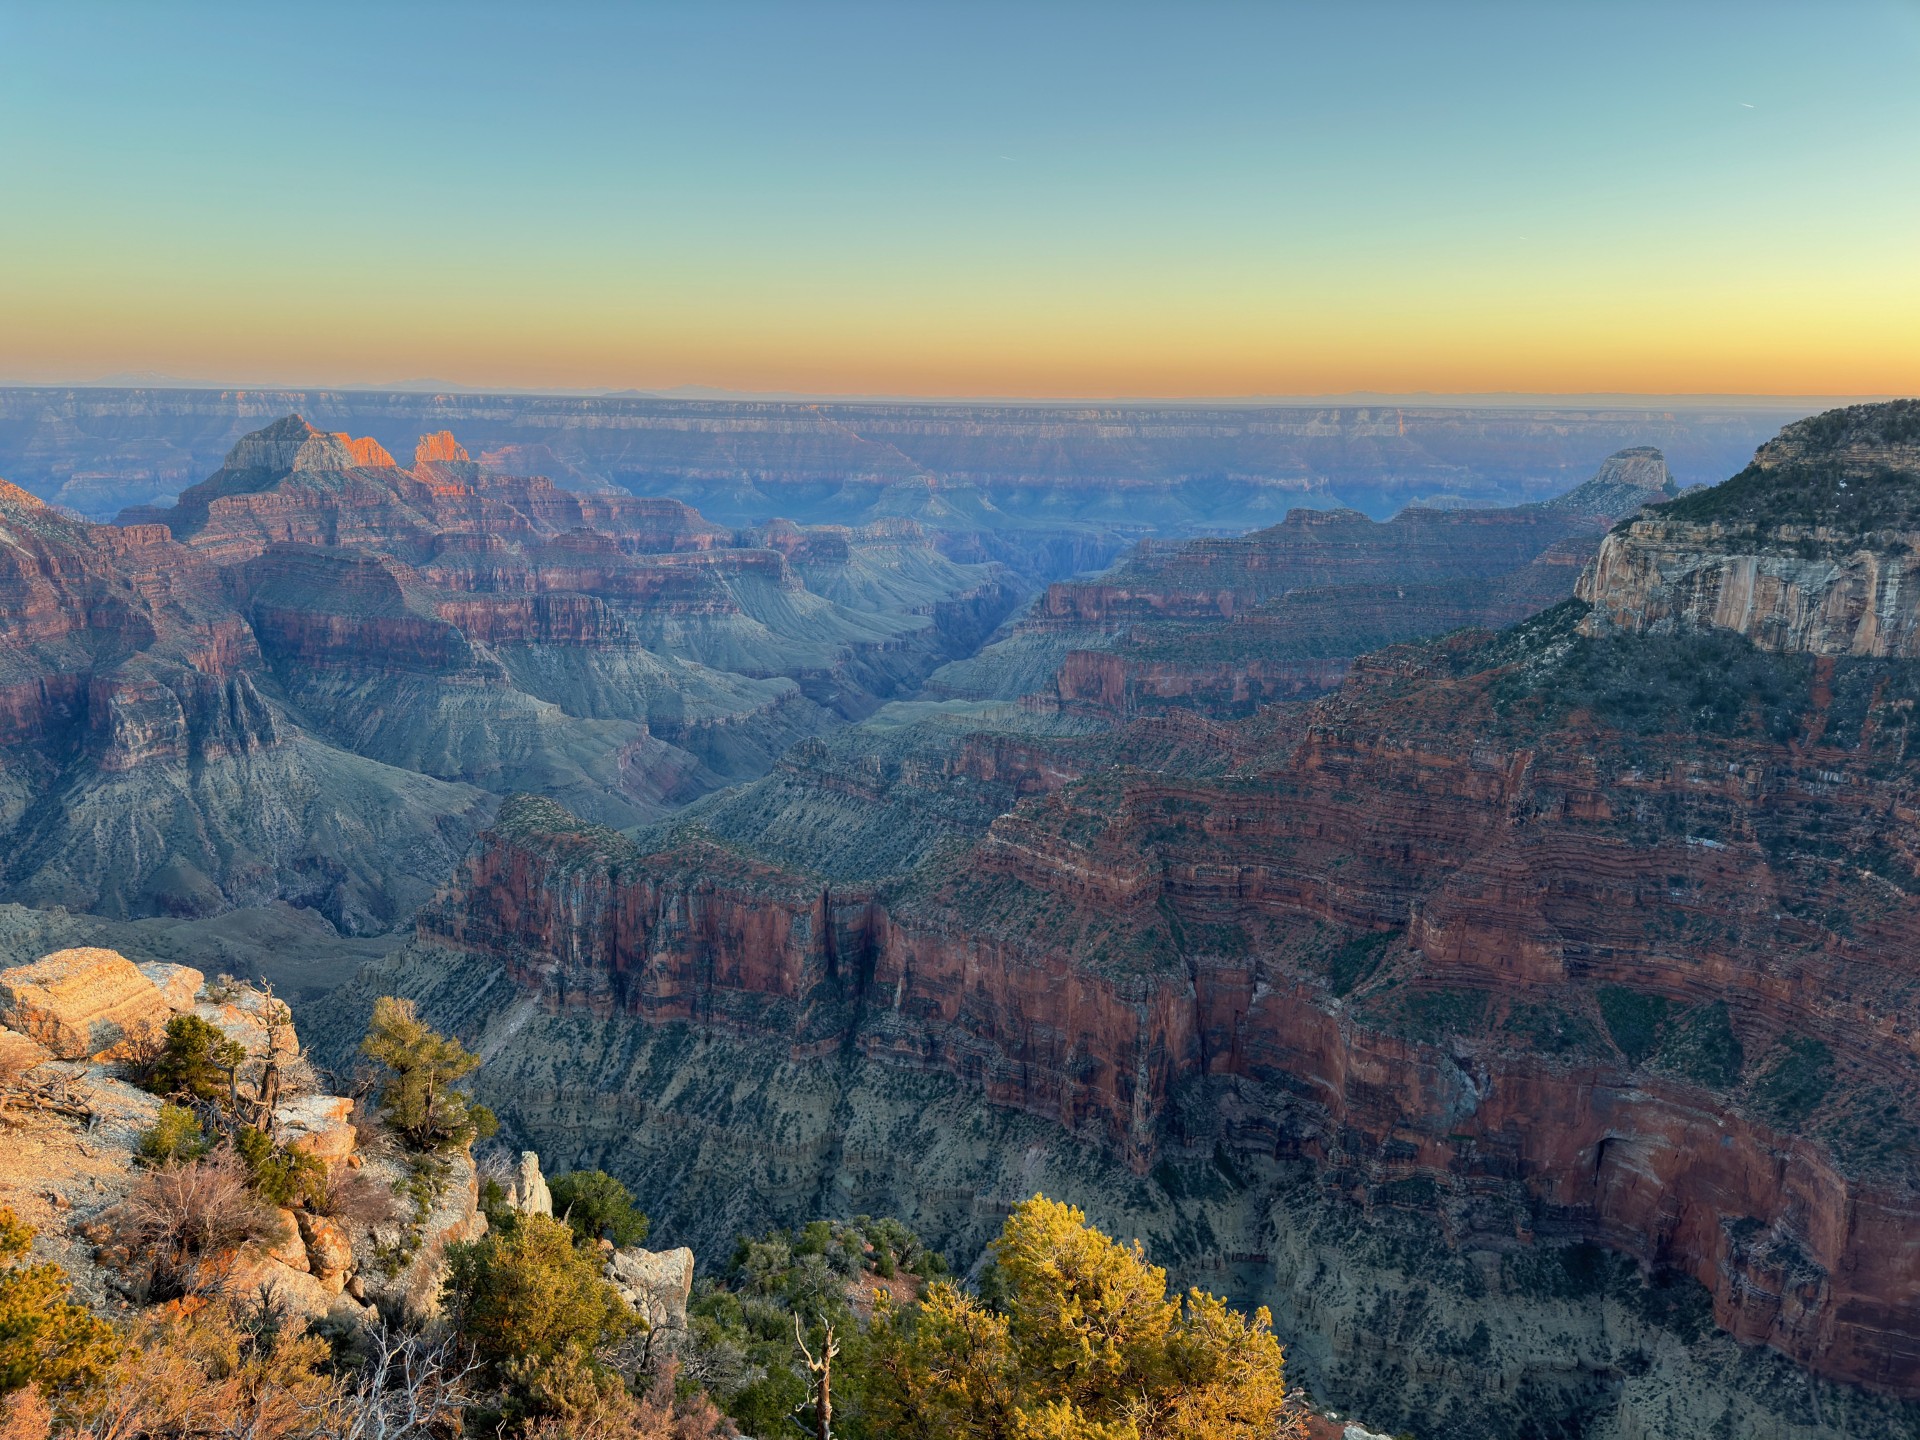 A sunset with a vibrant mix of color from the North Rim showing a spectacular canyon landscape below